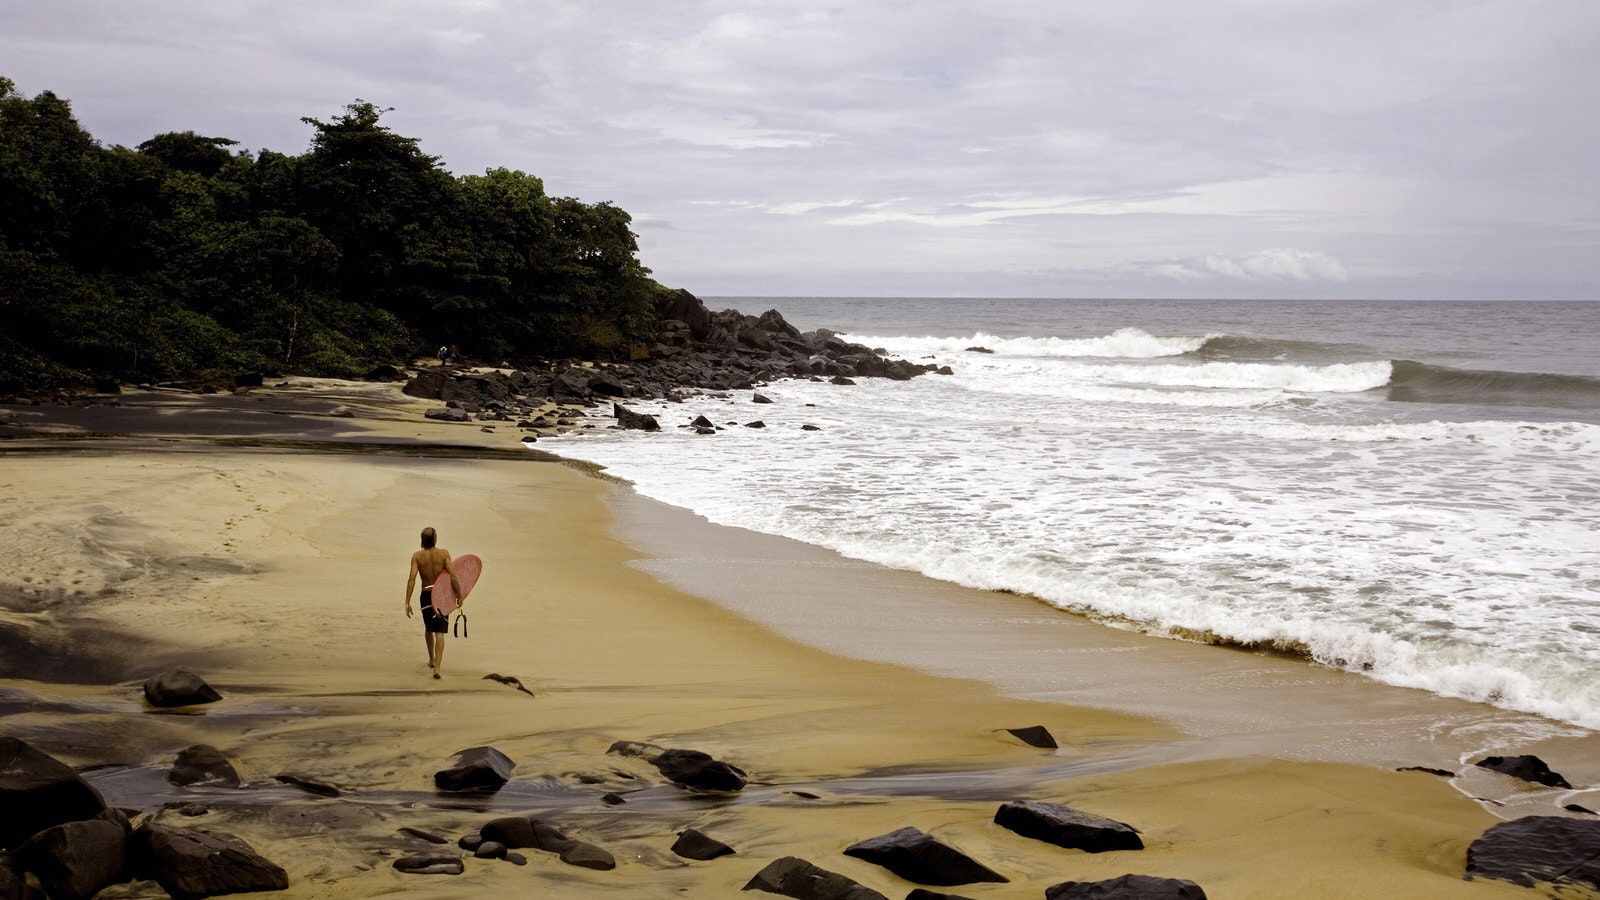 A surfer, with board under his right arm, walks alone along a beach at Robertsport; the beach is backed by verdant forest, while rolling waves crash on the beach